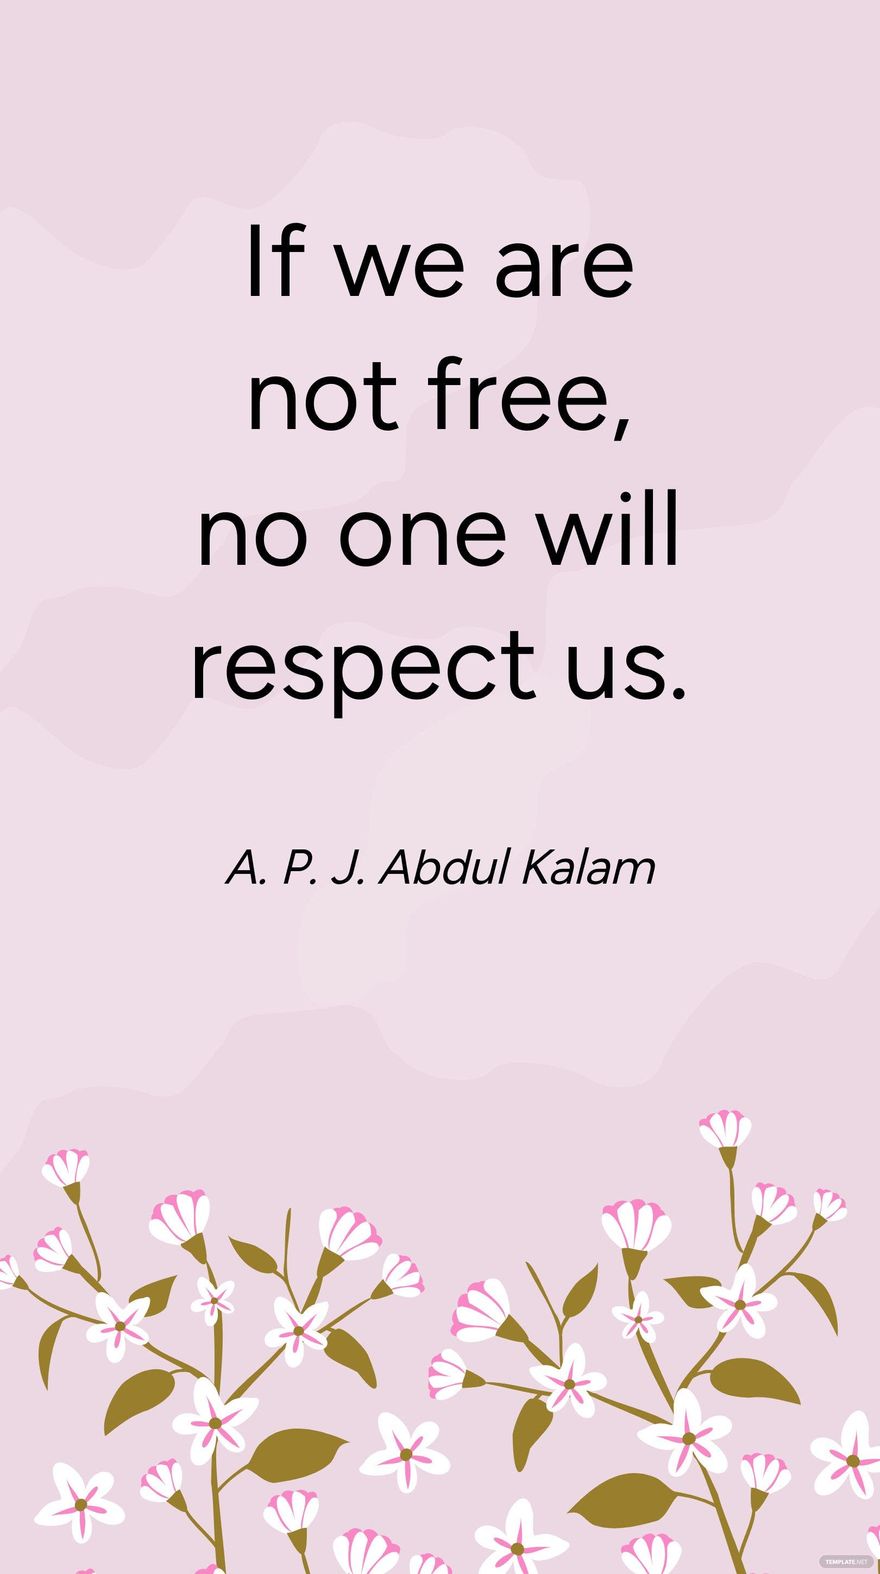 A. P. J. Abdul Kalam - If we are not free, no one will respect us. in JPG